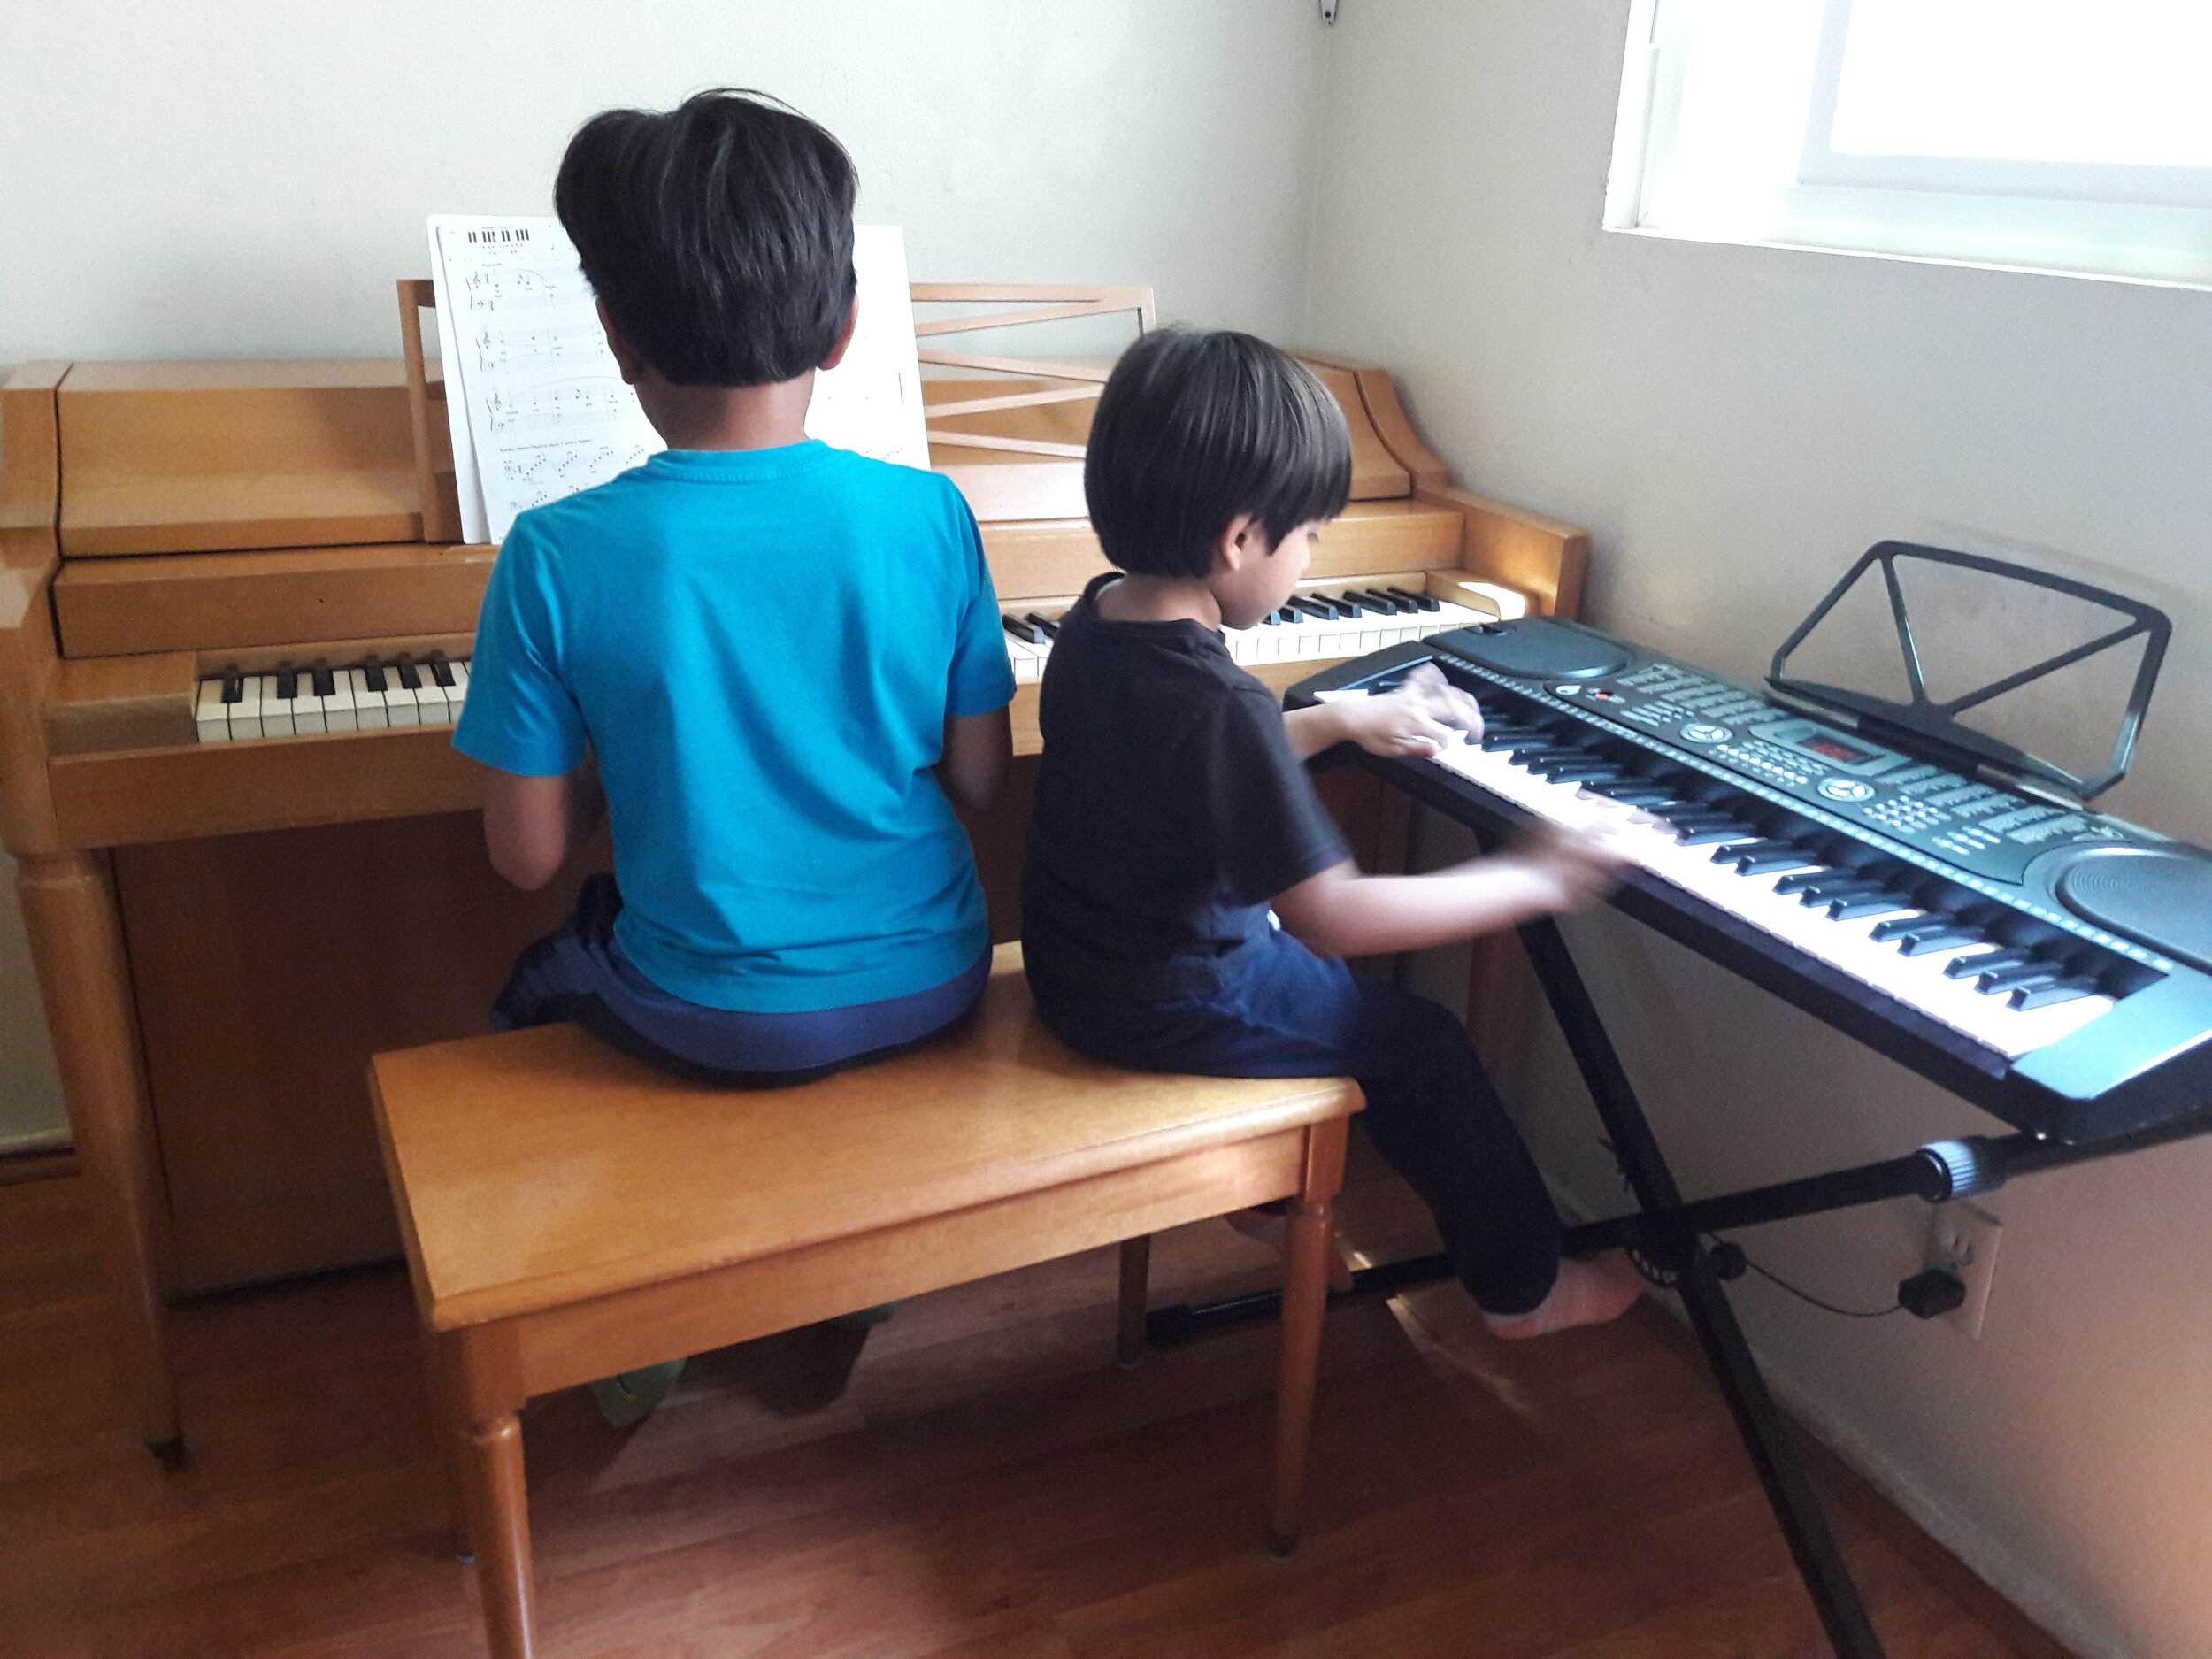 Practicing Piano